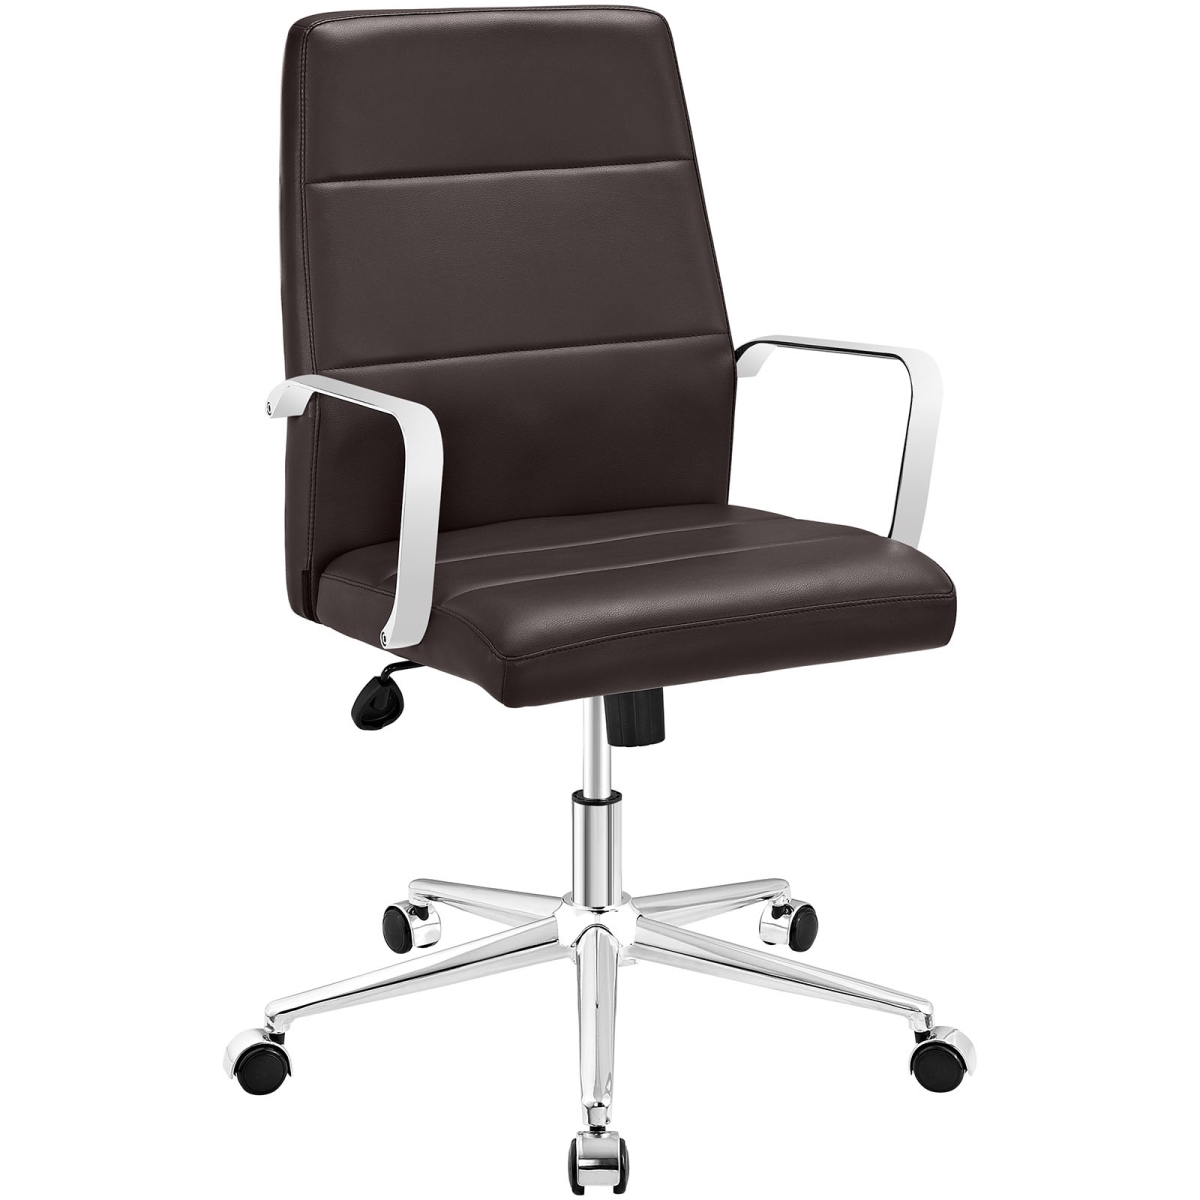 Modway Eei-2121-brn Stride Mid Back Office Chair, Brown